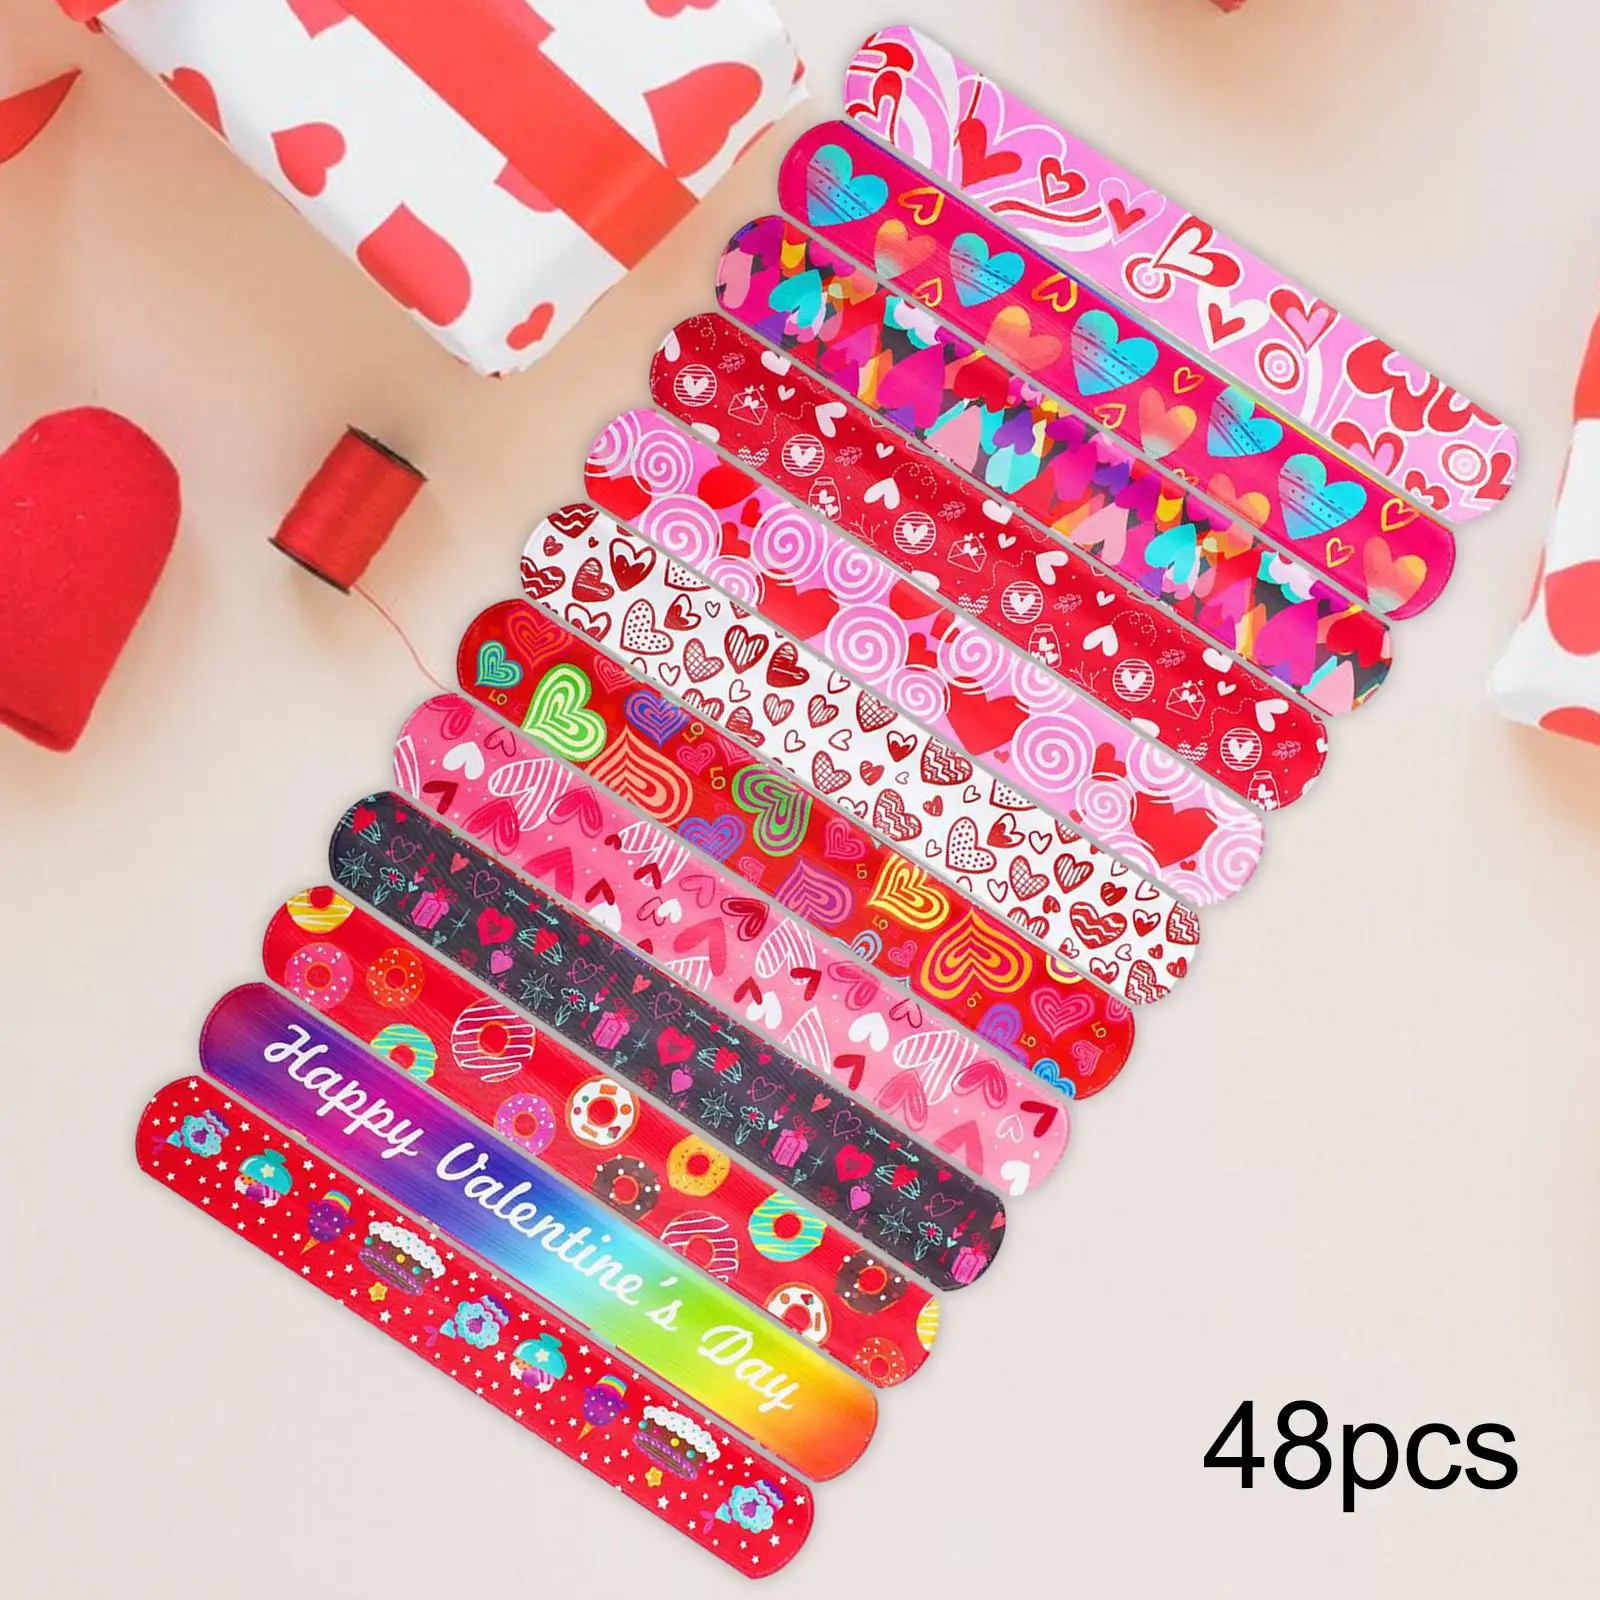 48 Pieces Valentine`s Day Slap Bracelets Colorful Heart Design Toy Blessing Kids Valentines Themed Toy Slap Band for Boys Girls